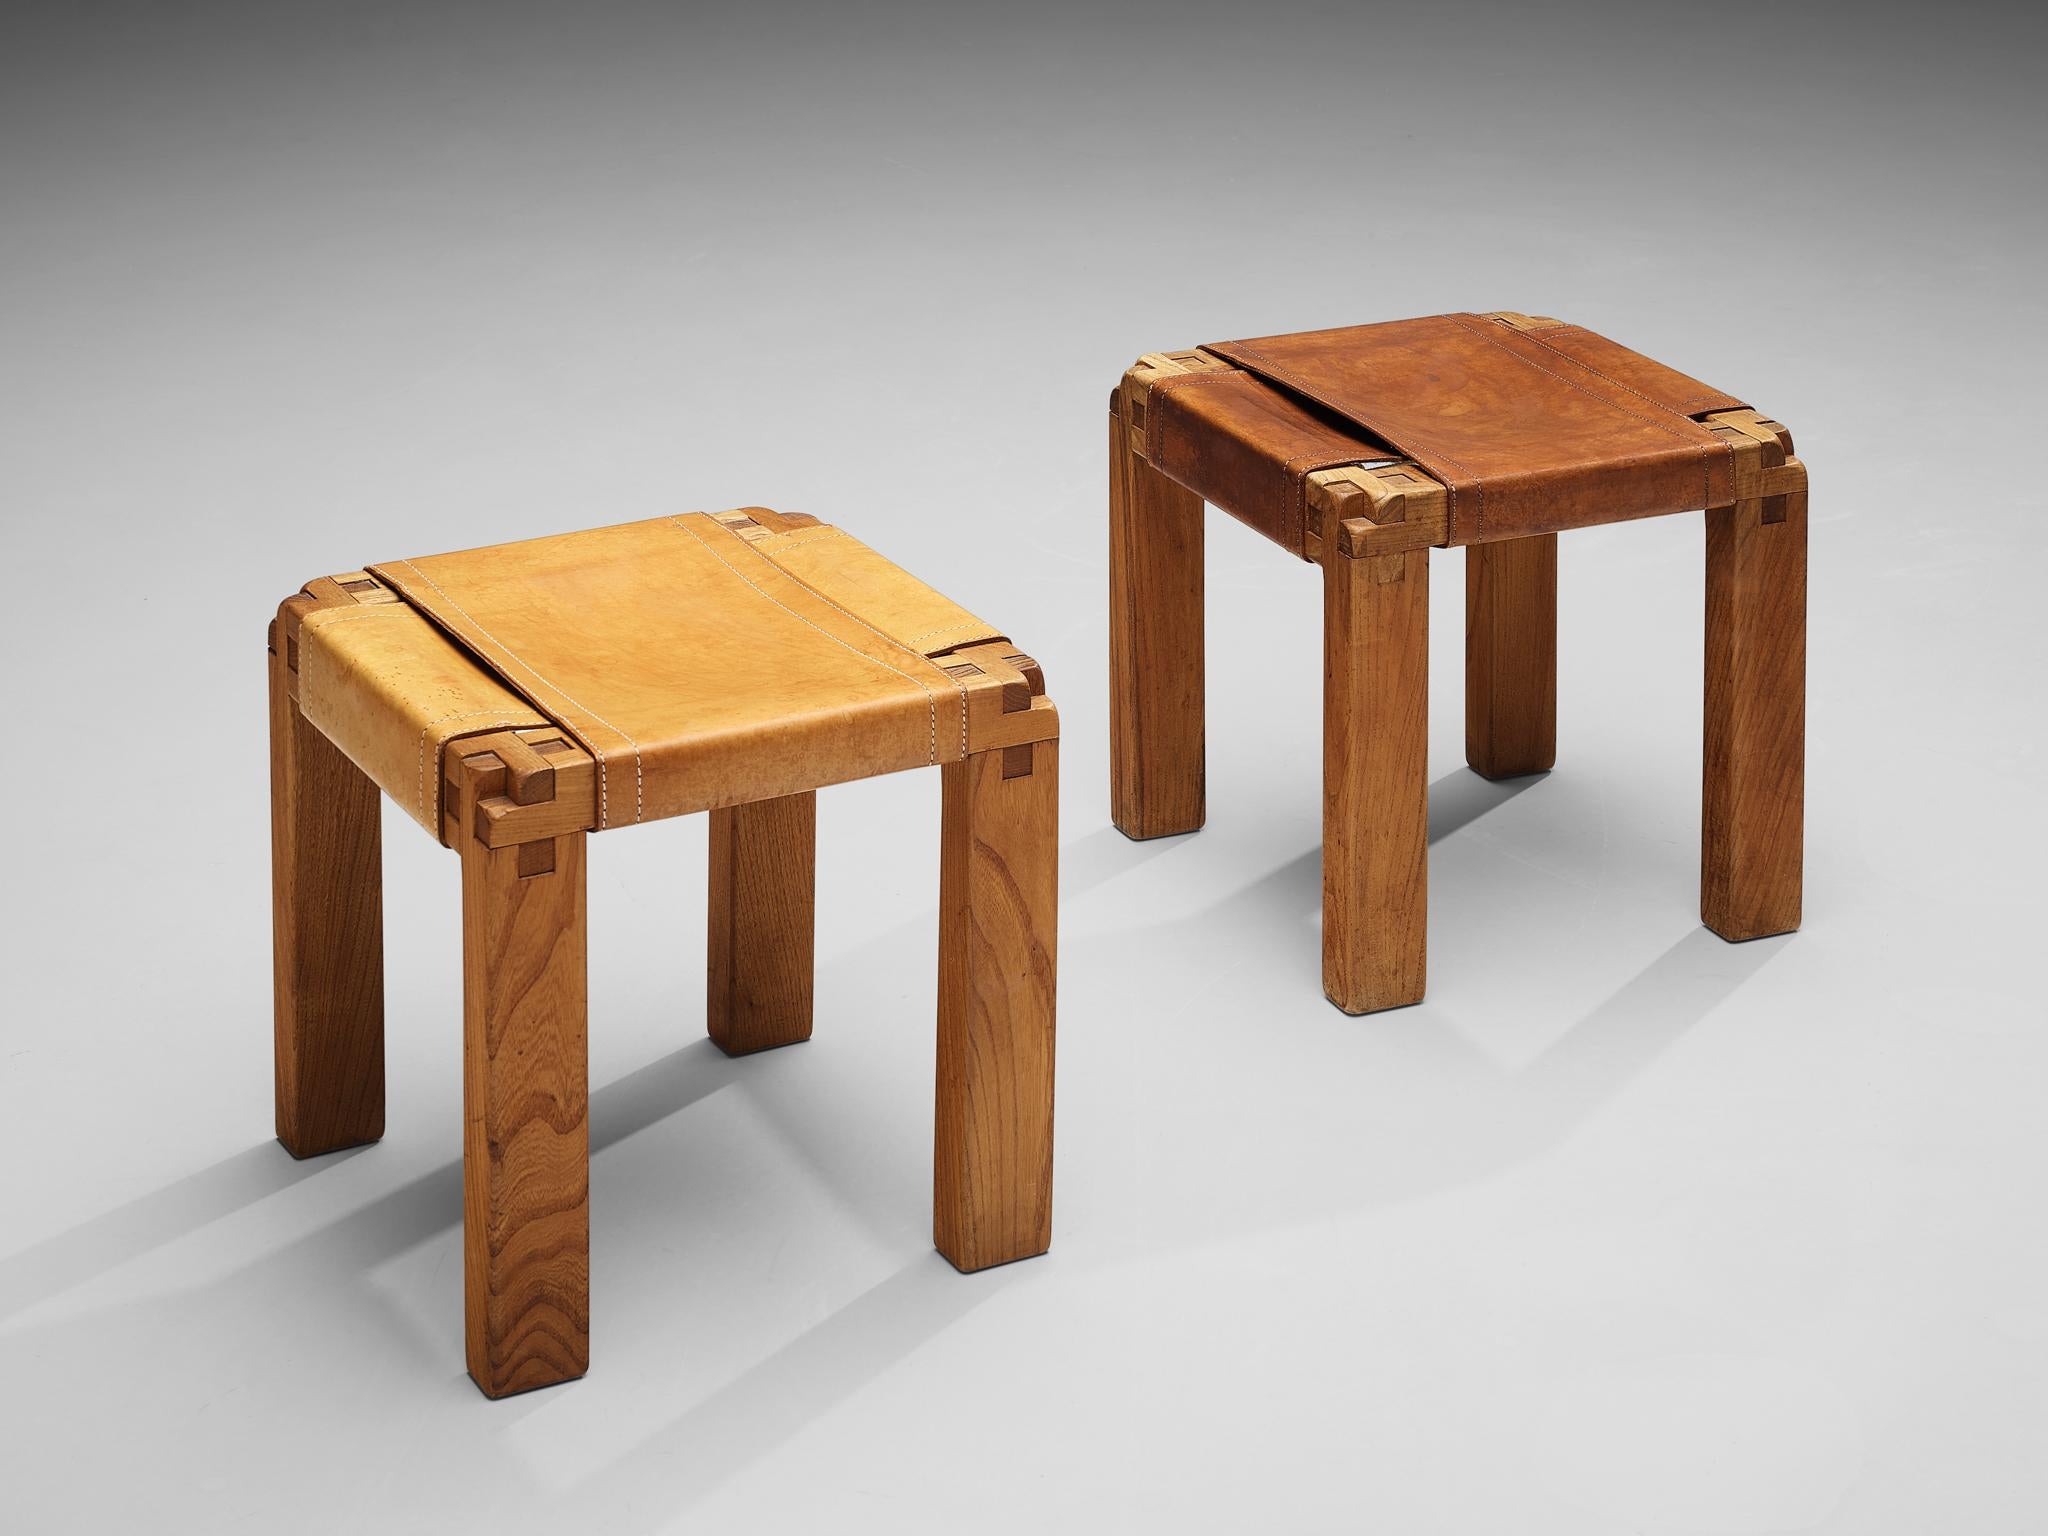 Pierre Chapo, pair of stools S11X, elm, cognac leather, France, circa 1966

The S11X stool by Pierre Chapo shows great craftsmanship. The two leather sheets are wrapped around the elm wood frame. Chapo designed the S11 chairs and the stool with a